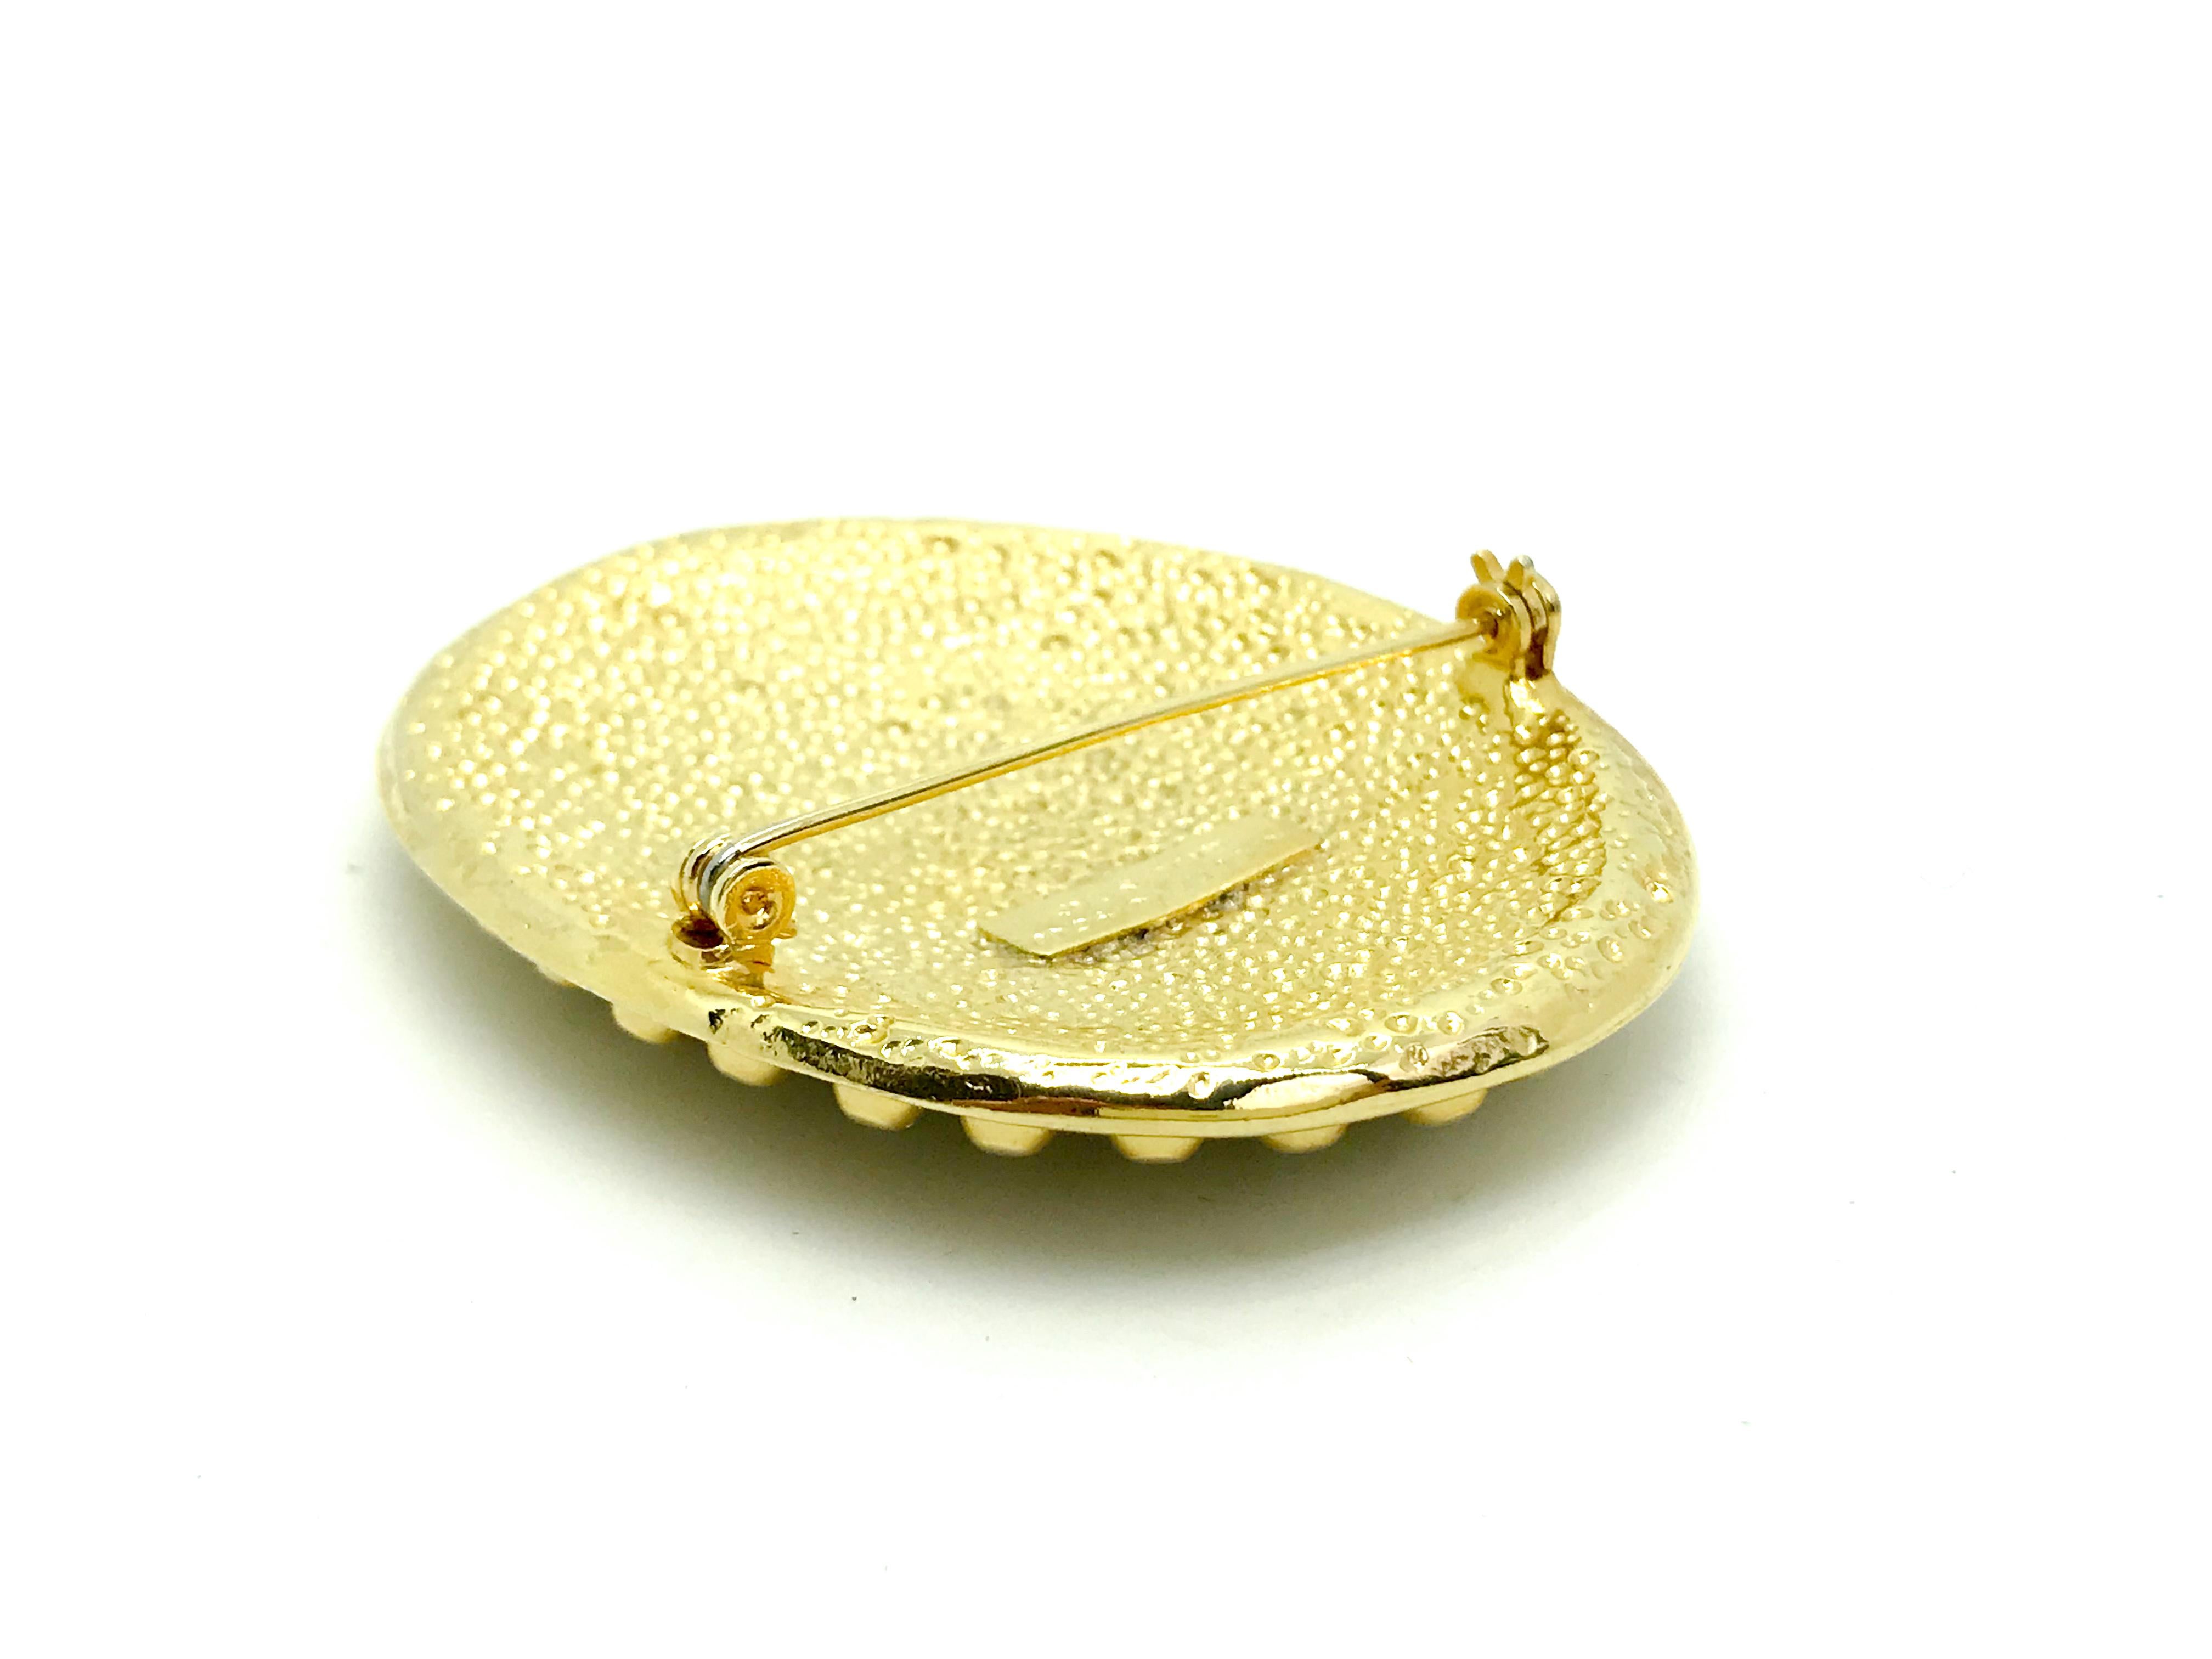 Contemporary Gianni Versace 1980s Vintage Large Statement Brooch Pin  For Sale